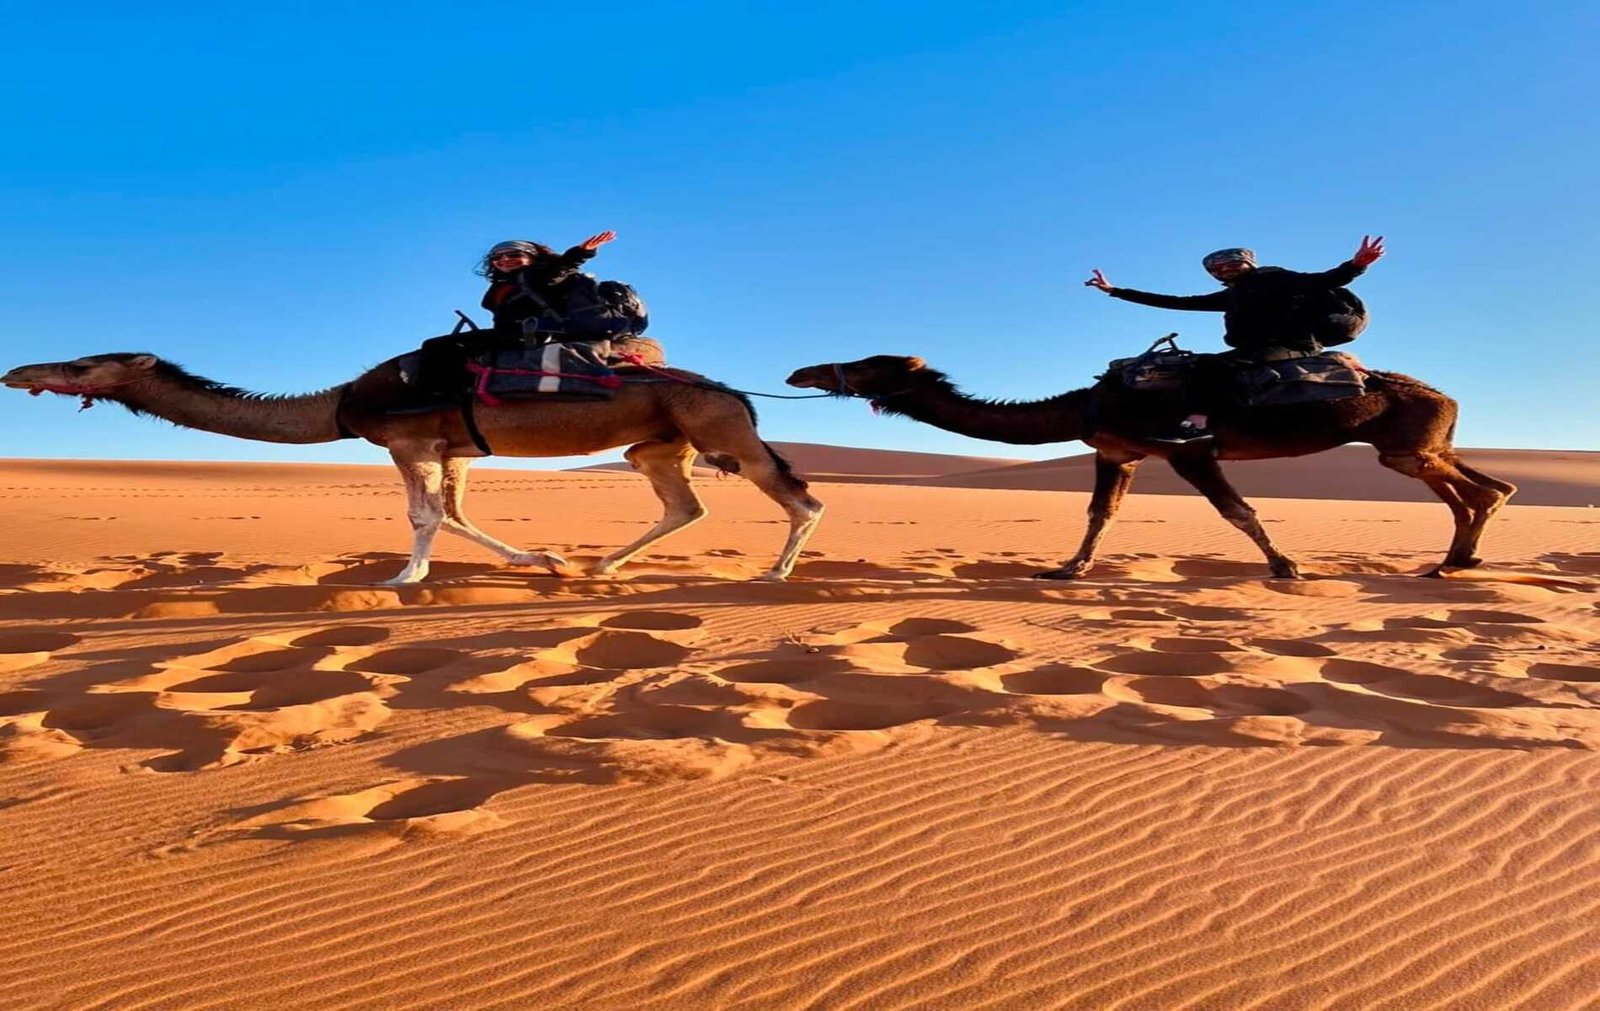 How to get to the desert from Marrakech